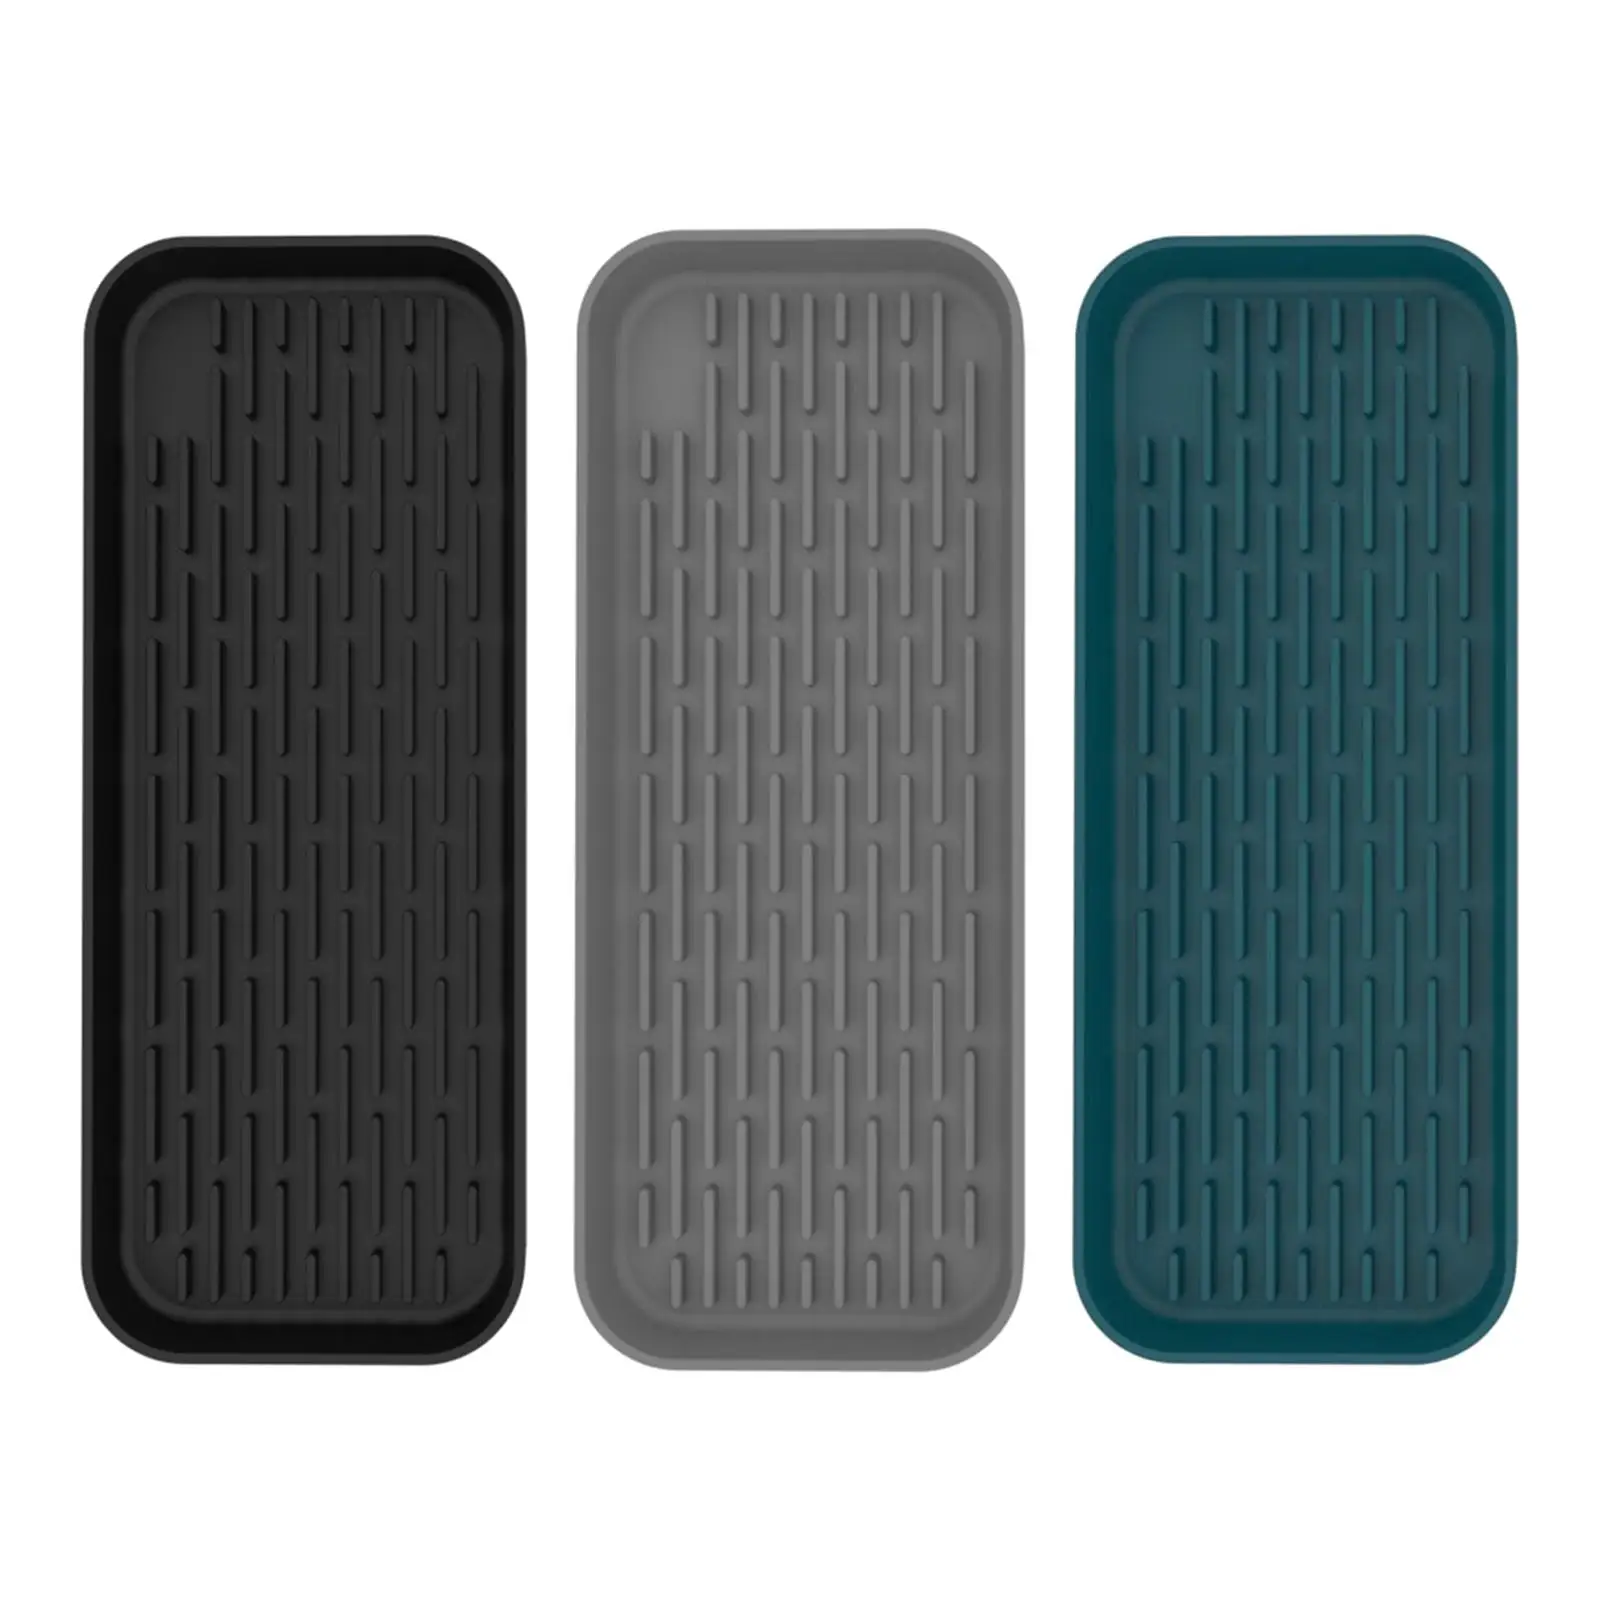 Silicone Tray Organizer Mat Protector Mats Tableware Sink Drainer Pad Waterproof Non Slip Drip Tray for Home Kitchen Hotel